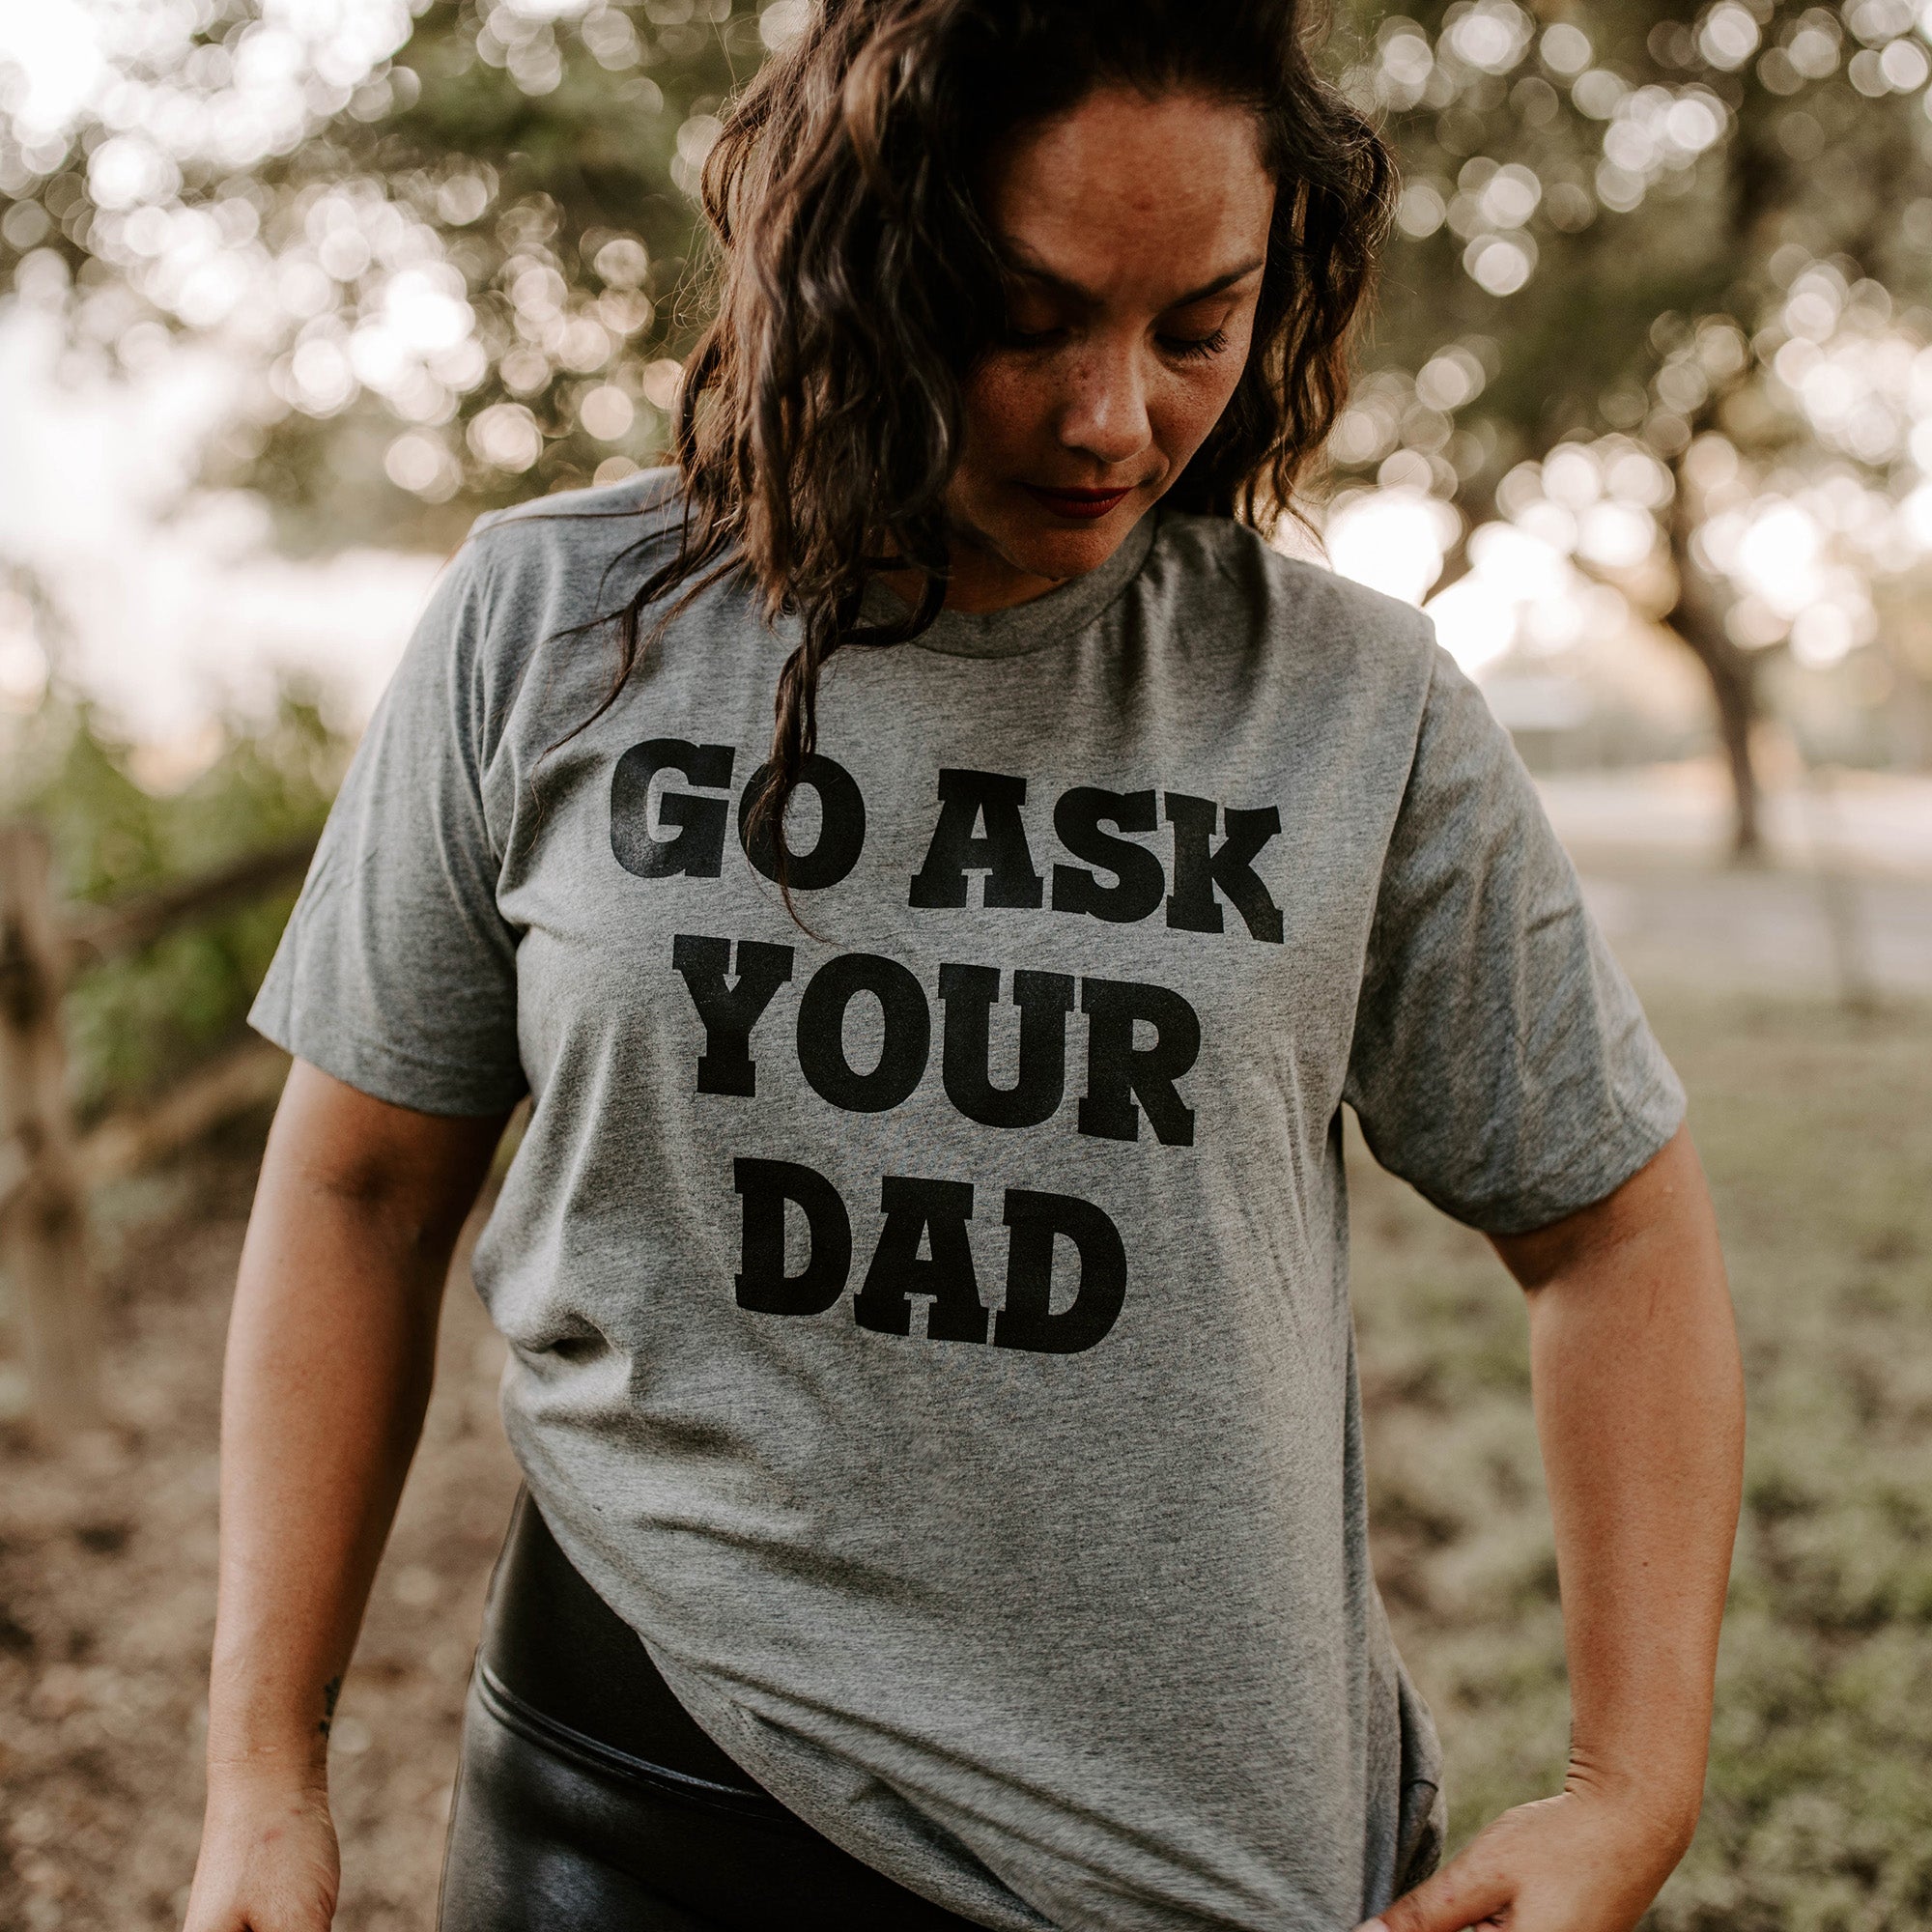 Go Ask Your Dad Shirt, Funny Mom Tee XL